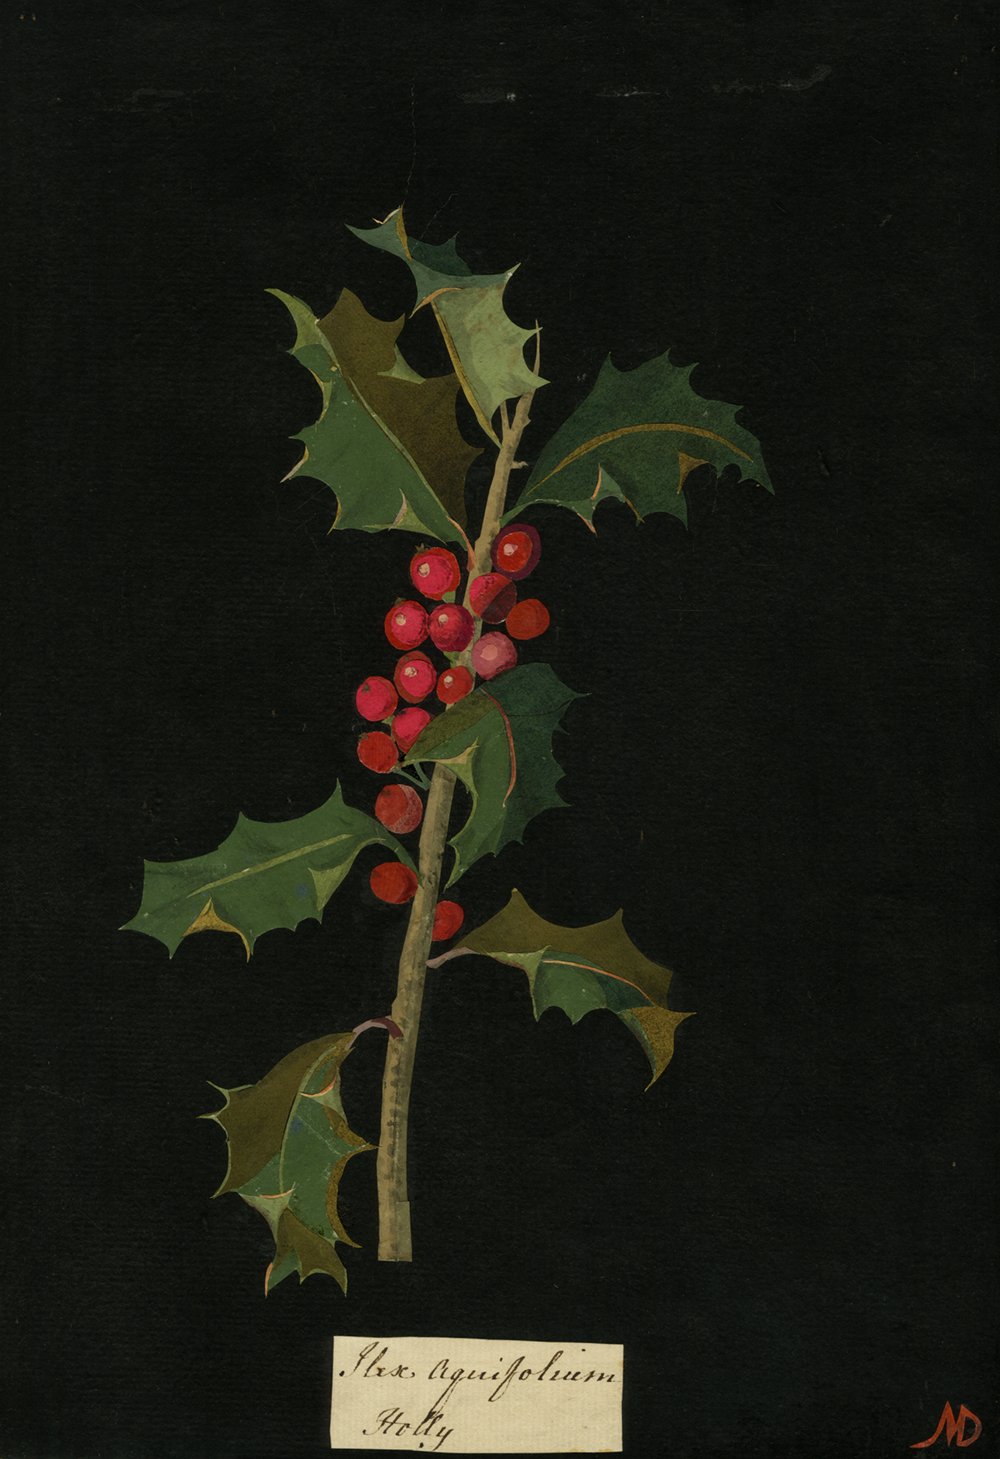 Holly by Mary Delany - 1775 - 26.8 x 18.9 cm British Museum